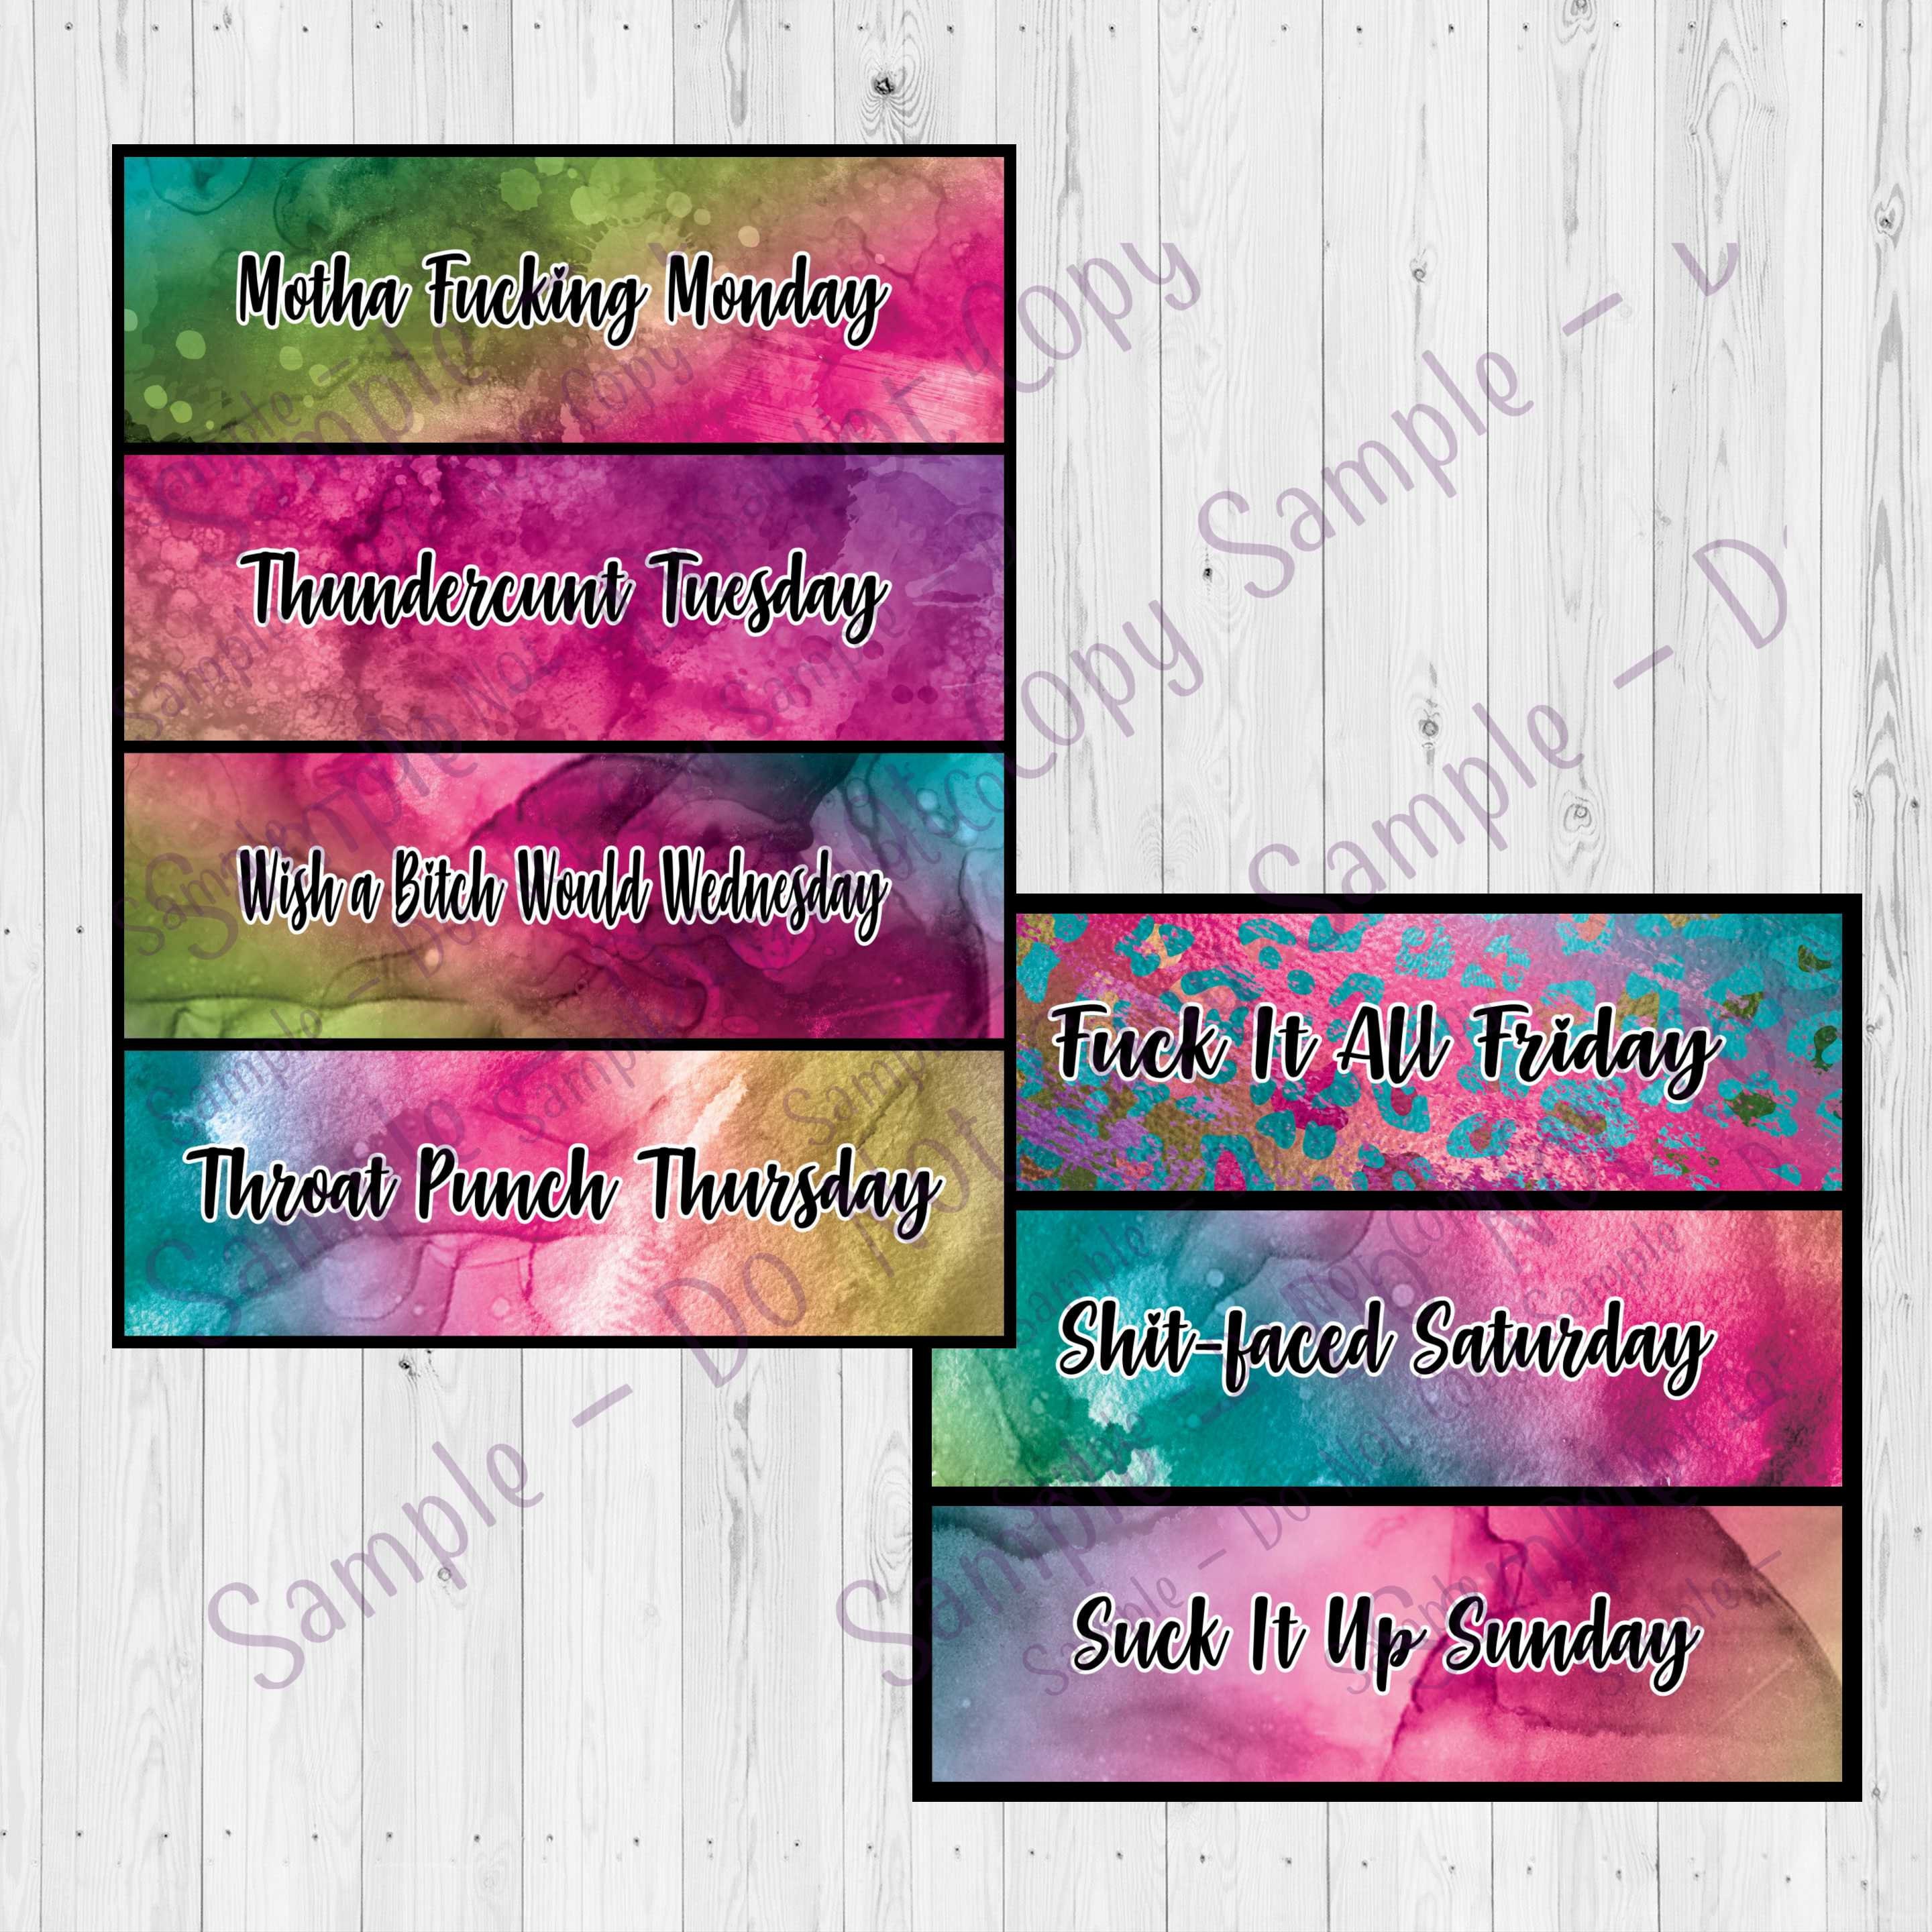 Snarky Days of the Week Pen Wraps, Clear Cast Pen Wraps, Sassy Pen Wraps, Weekday Pen Wraps, Vinyl Pen Wrap